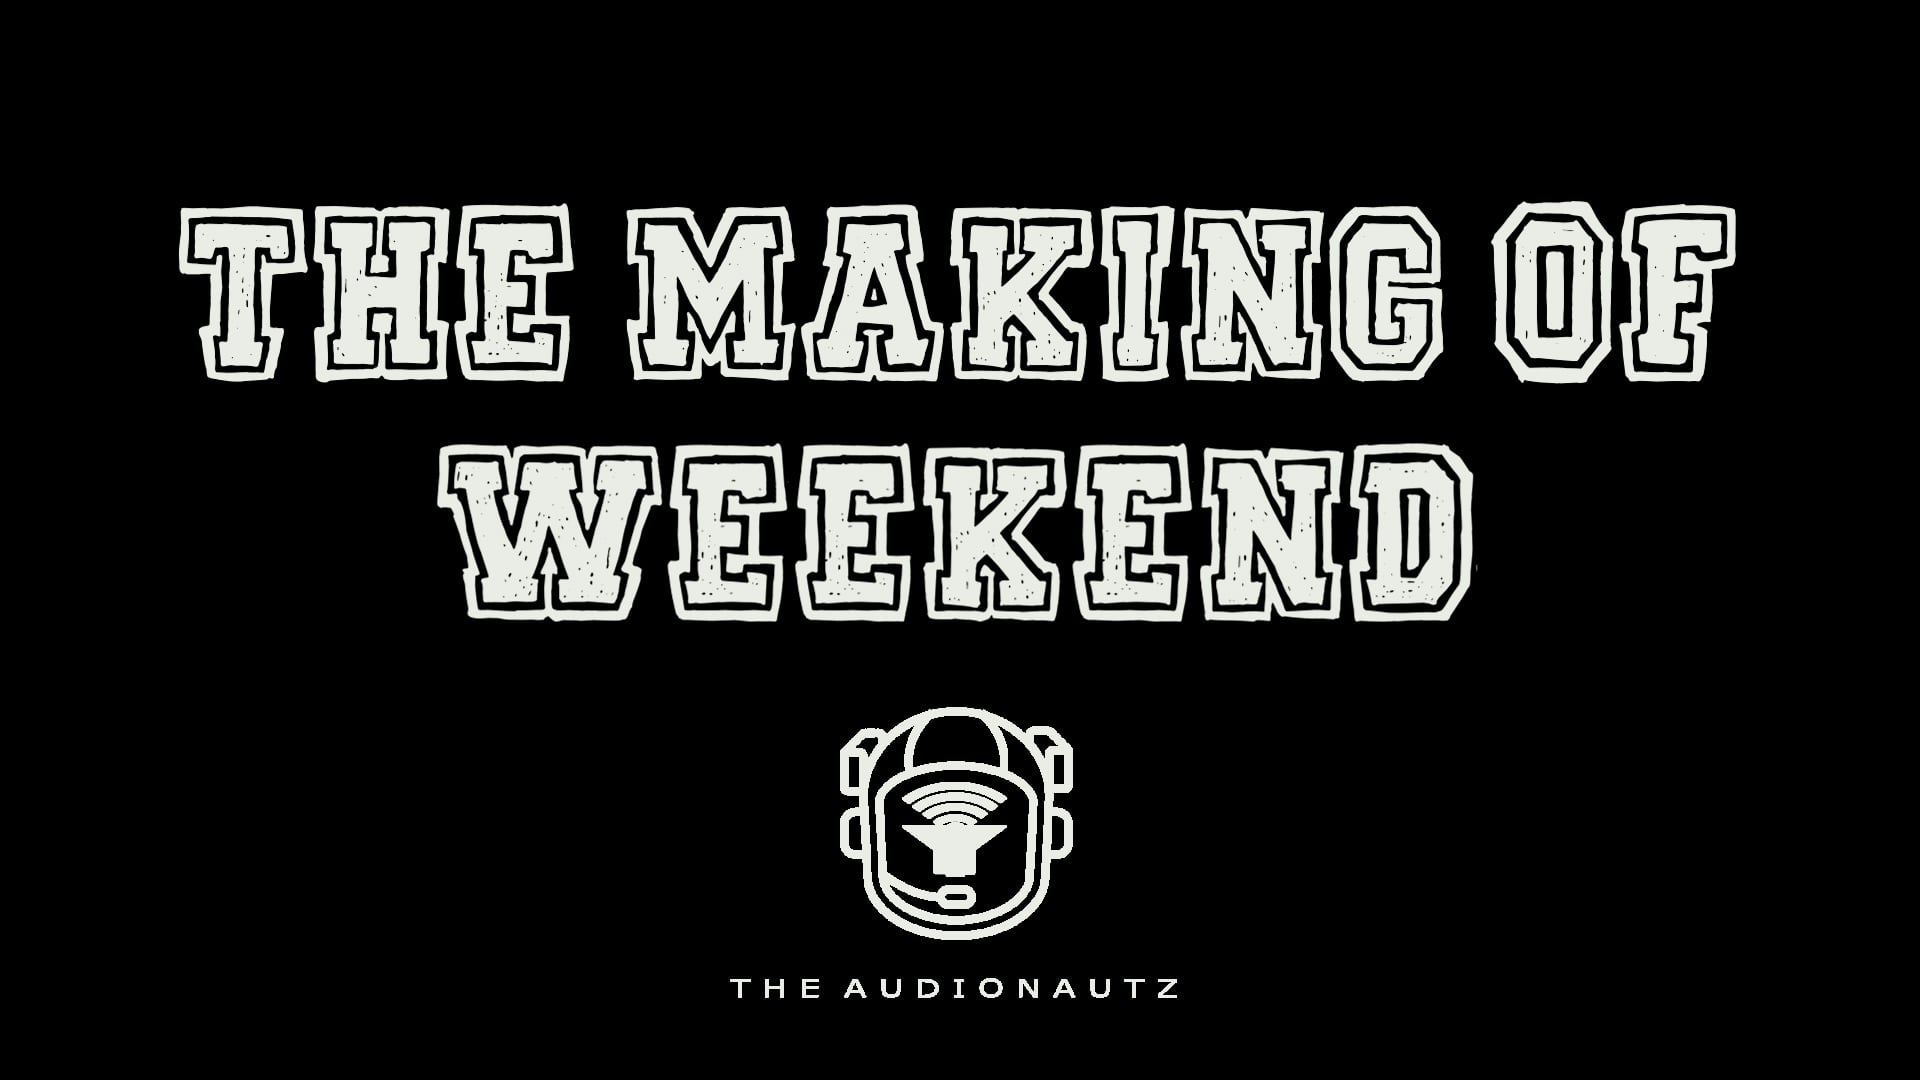 The Audionautz - Weekend (The Making Of)